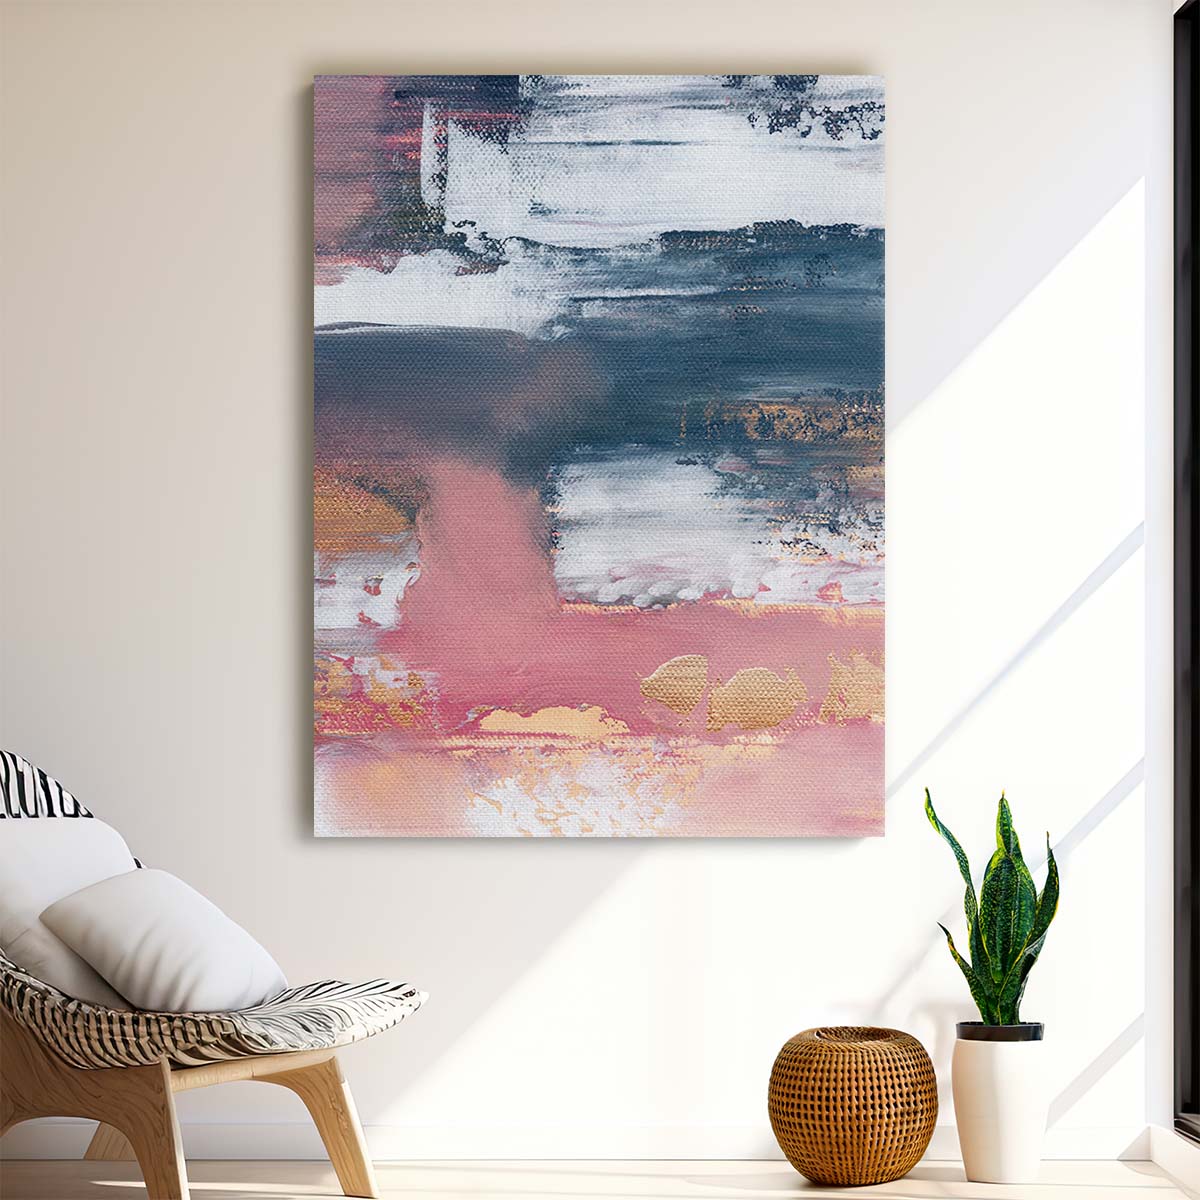 Colorful Tranquility Abstract Canvas Illustration - Blue Pink Painted Artwork by Luxuriance Designs, made in USA